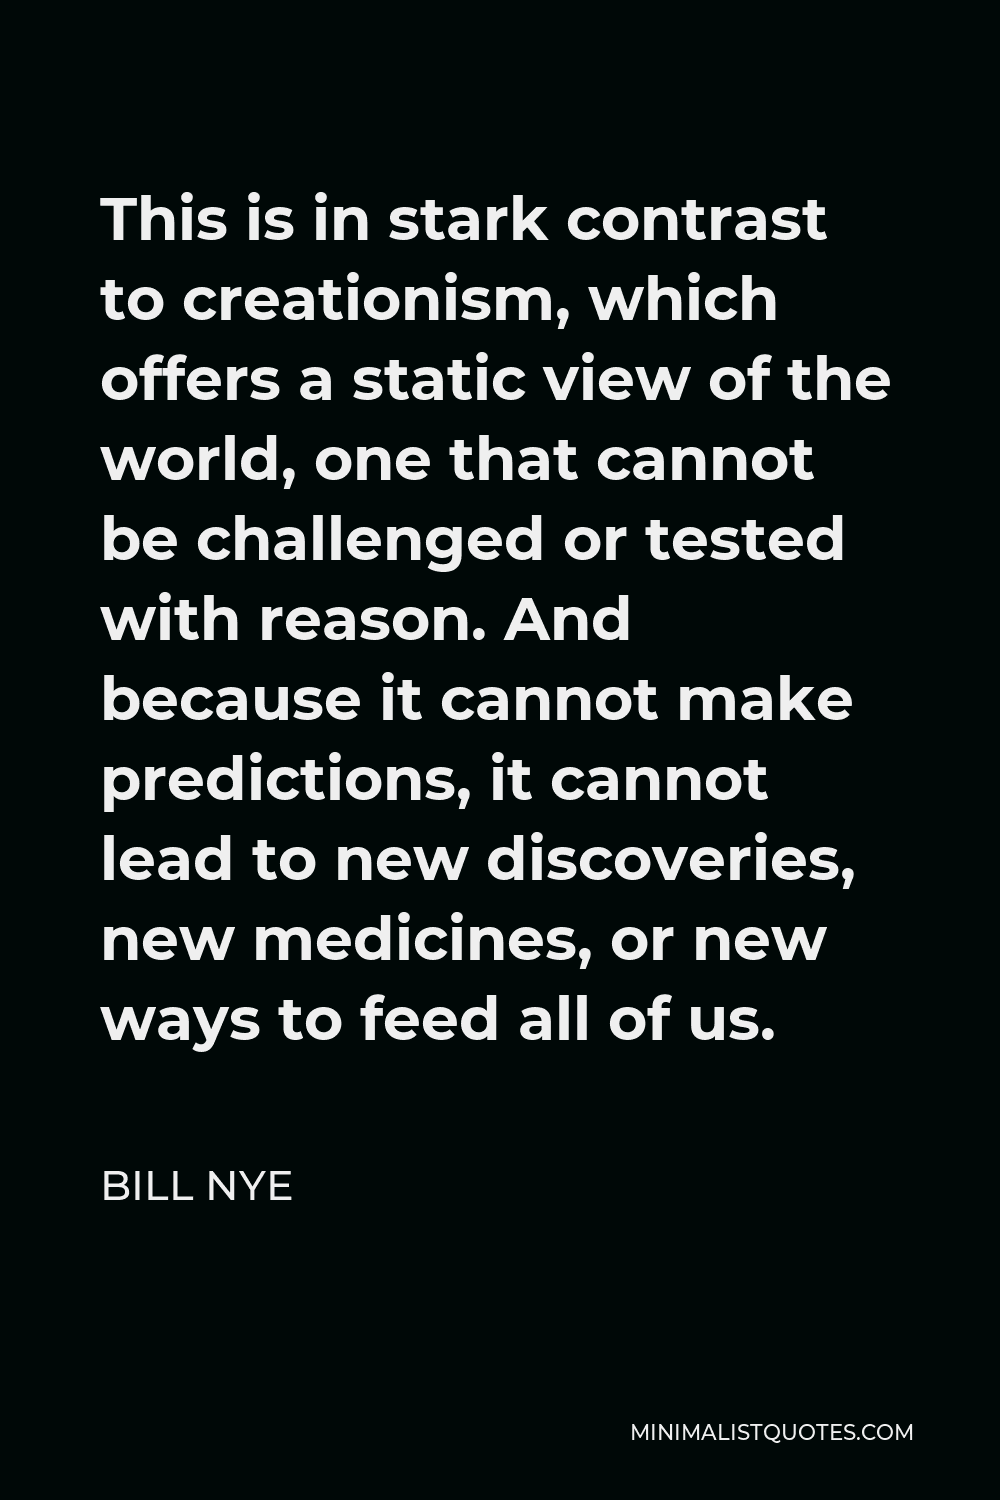 Bill Nye Quote - This is in stark contrast to creationism, which offers a static view of the world, one that cannot be challenged or tested with reason. And because it cannot make predictions, it cannot lead to new discoveries, new medicines, or new ways to feed all of us.